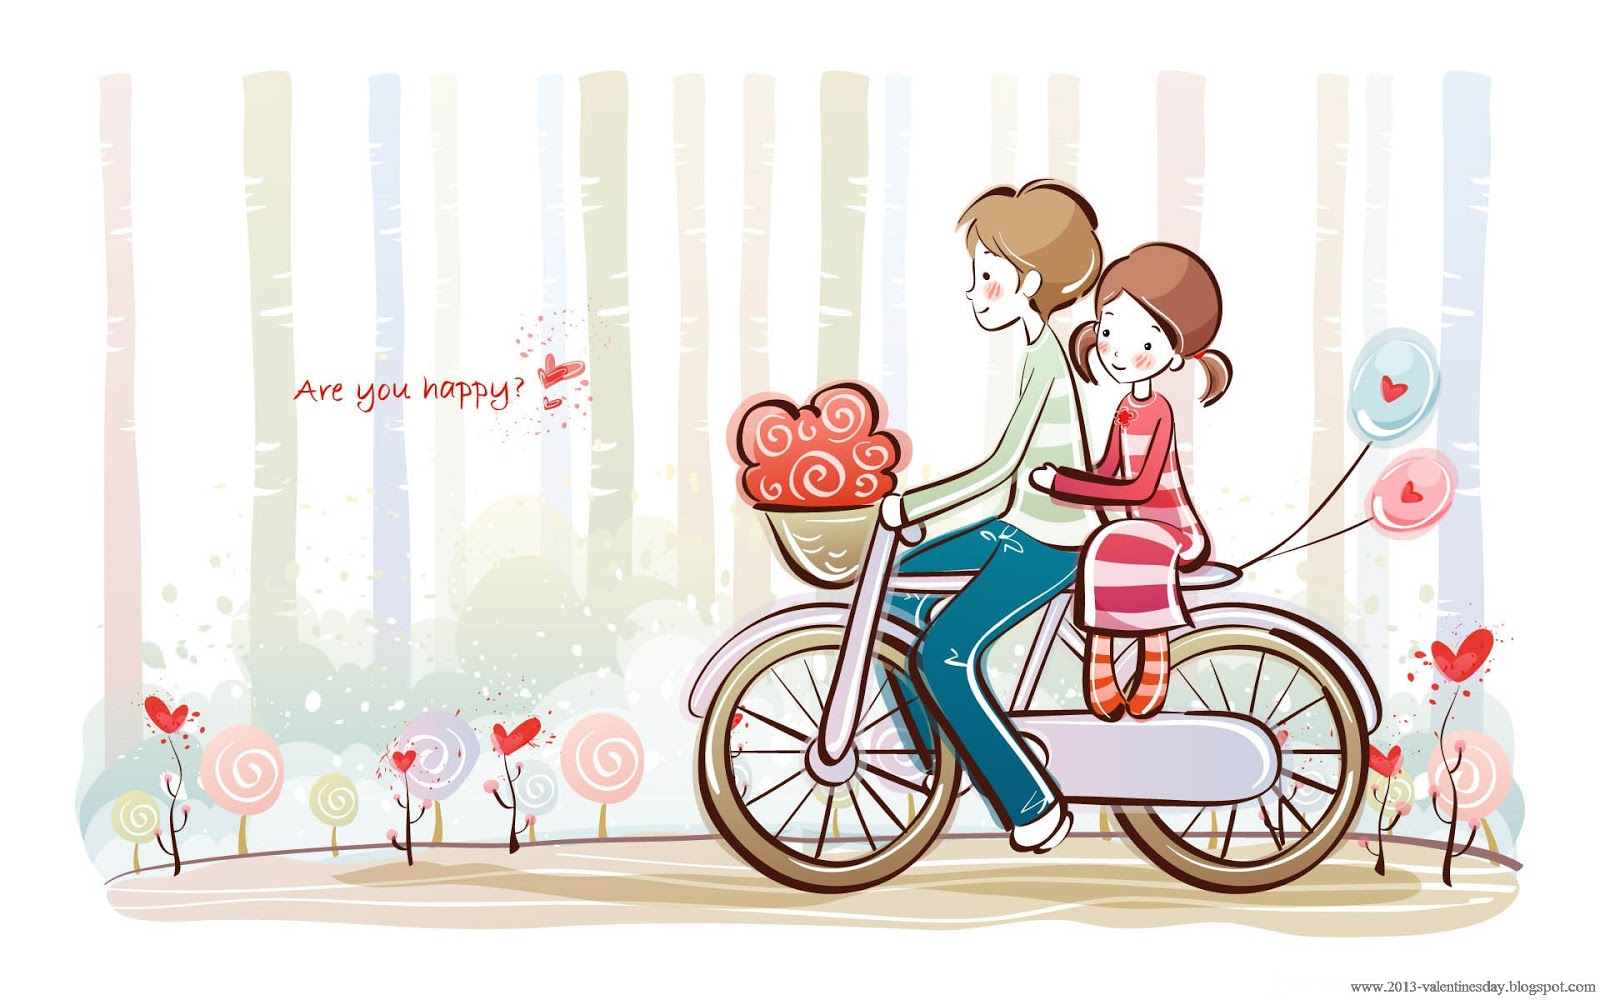 Cute Cartoon Couple Love HD Wallpaper For Valentines Day